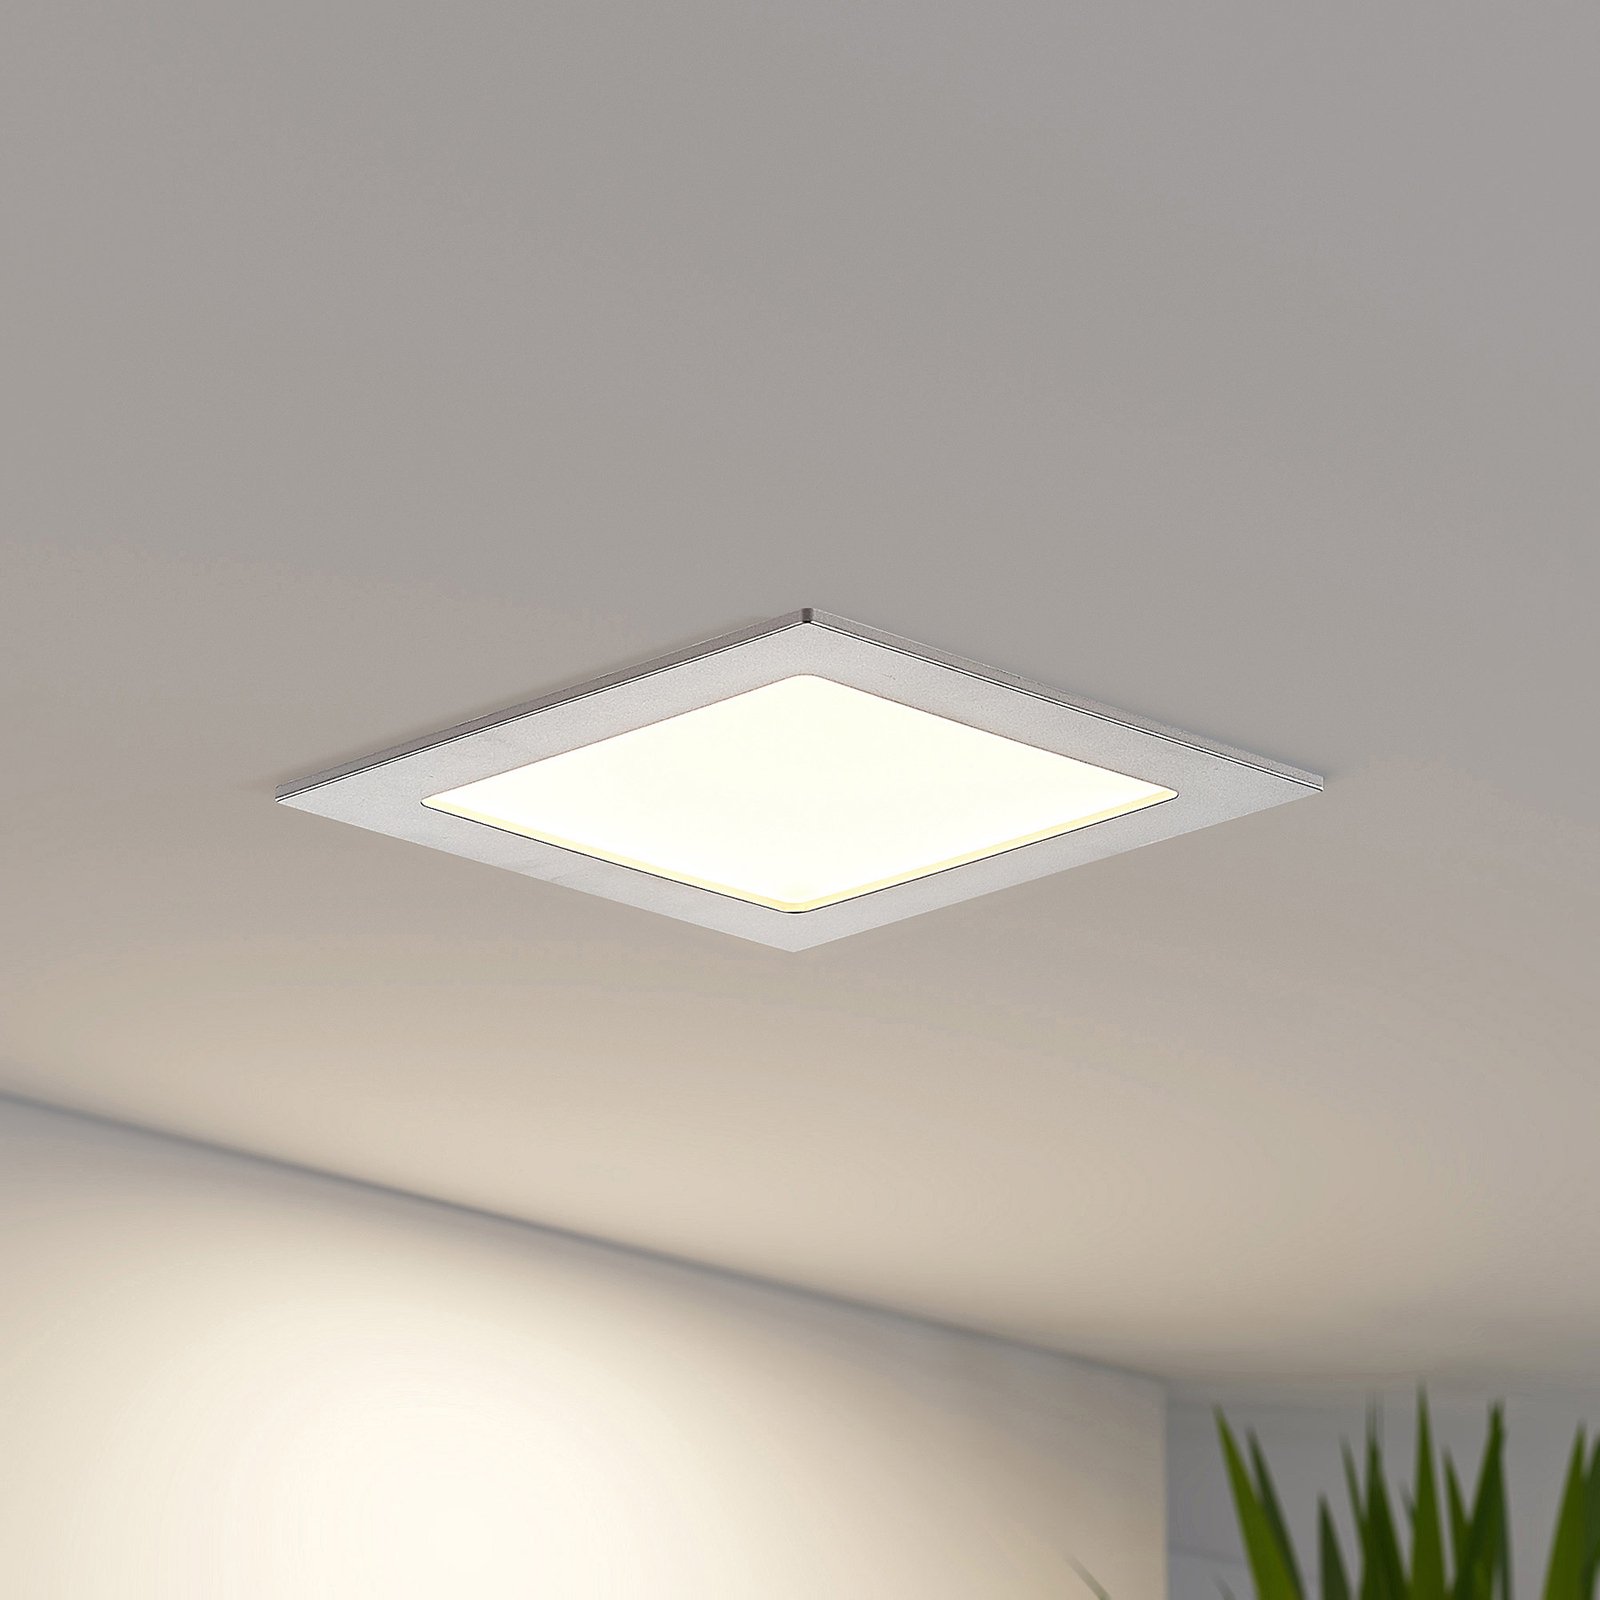 Prios Helina LED recessed light, silver, 16.5 cm